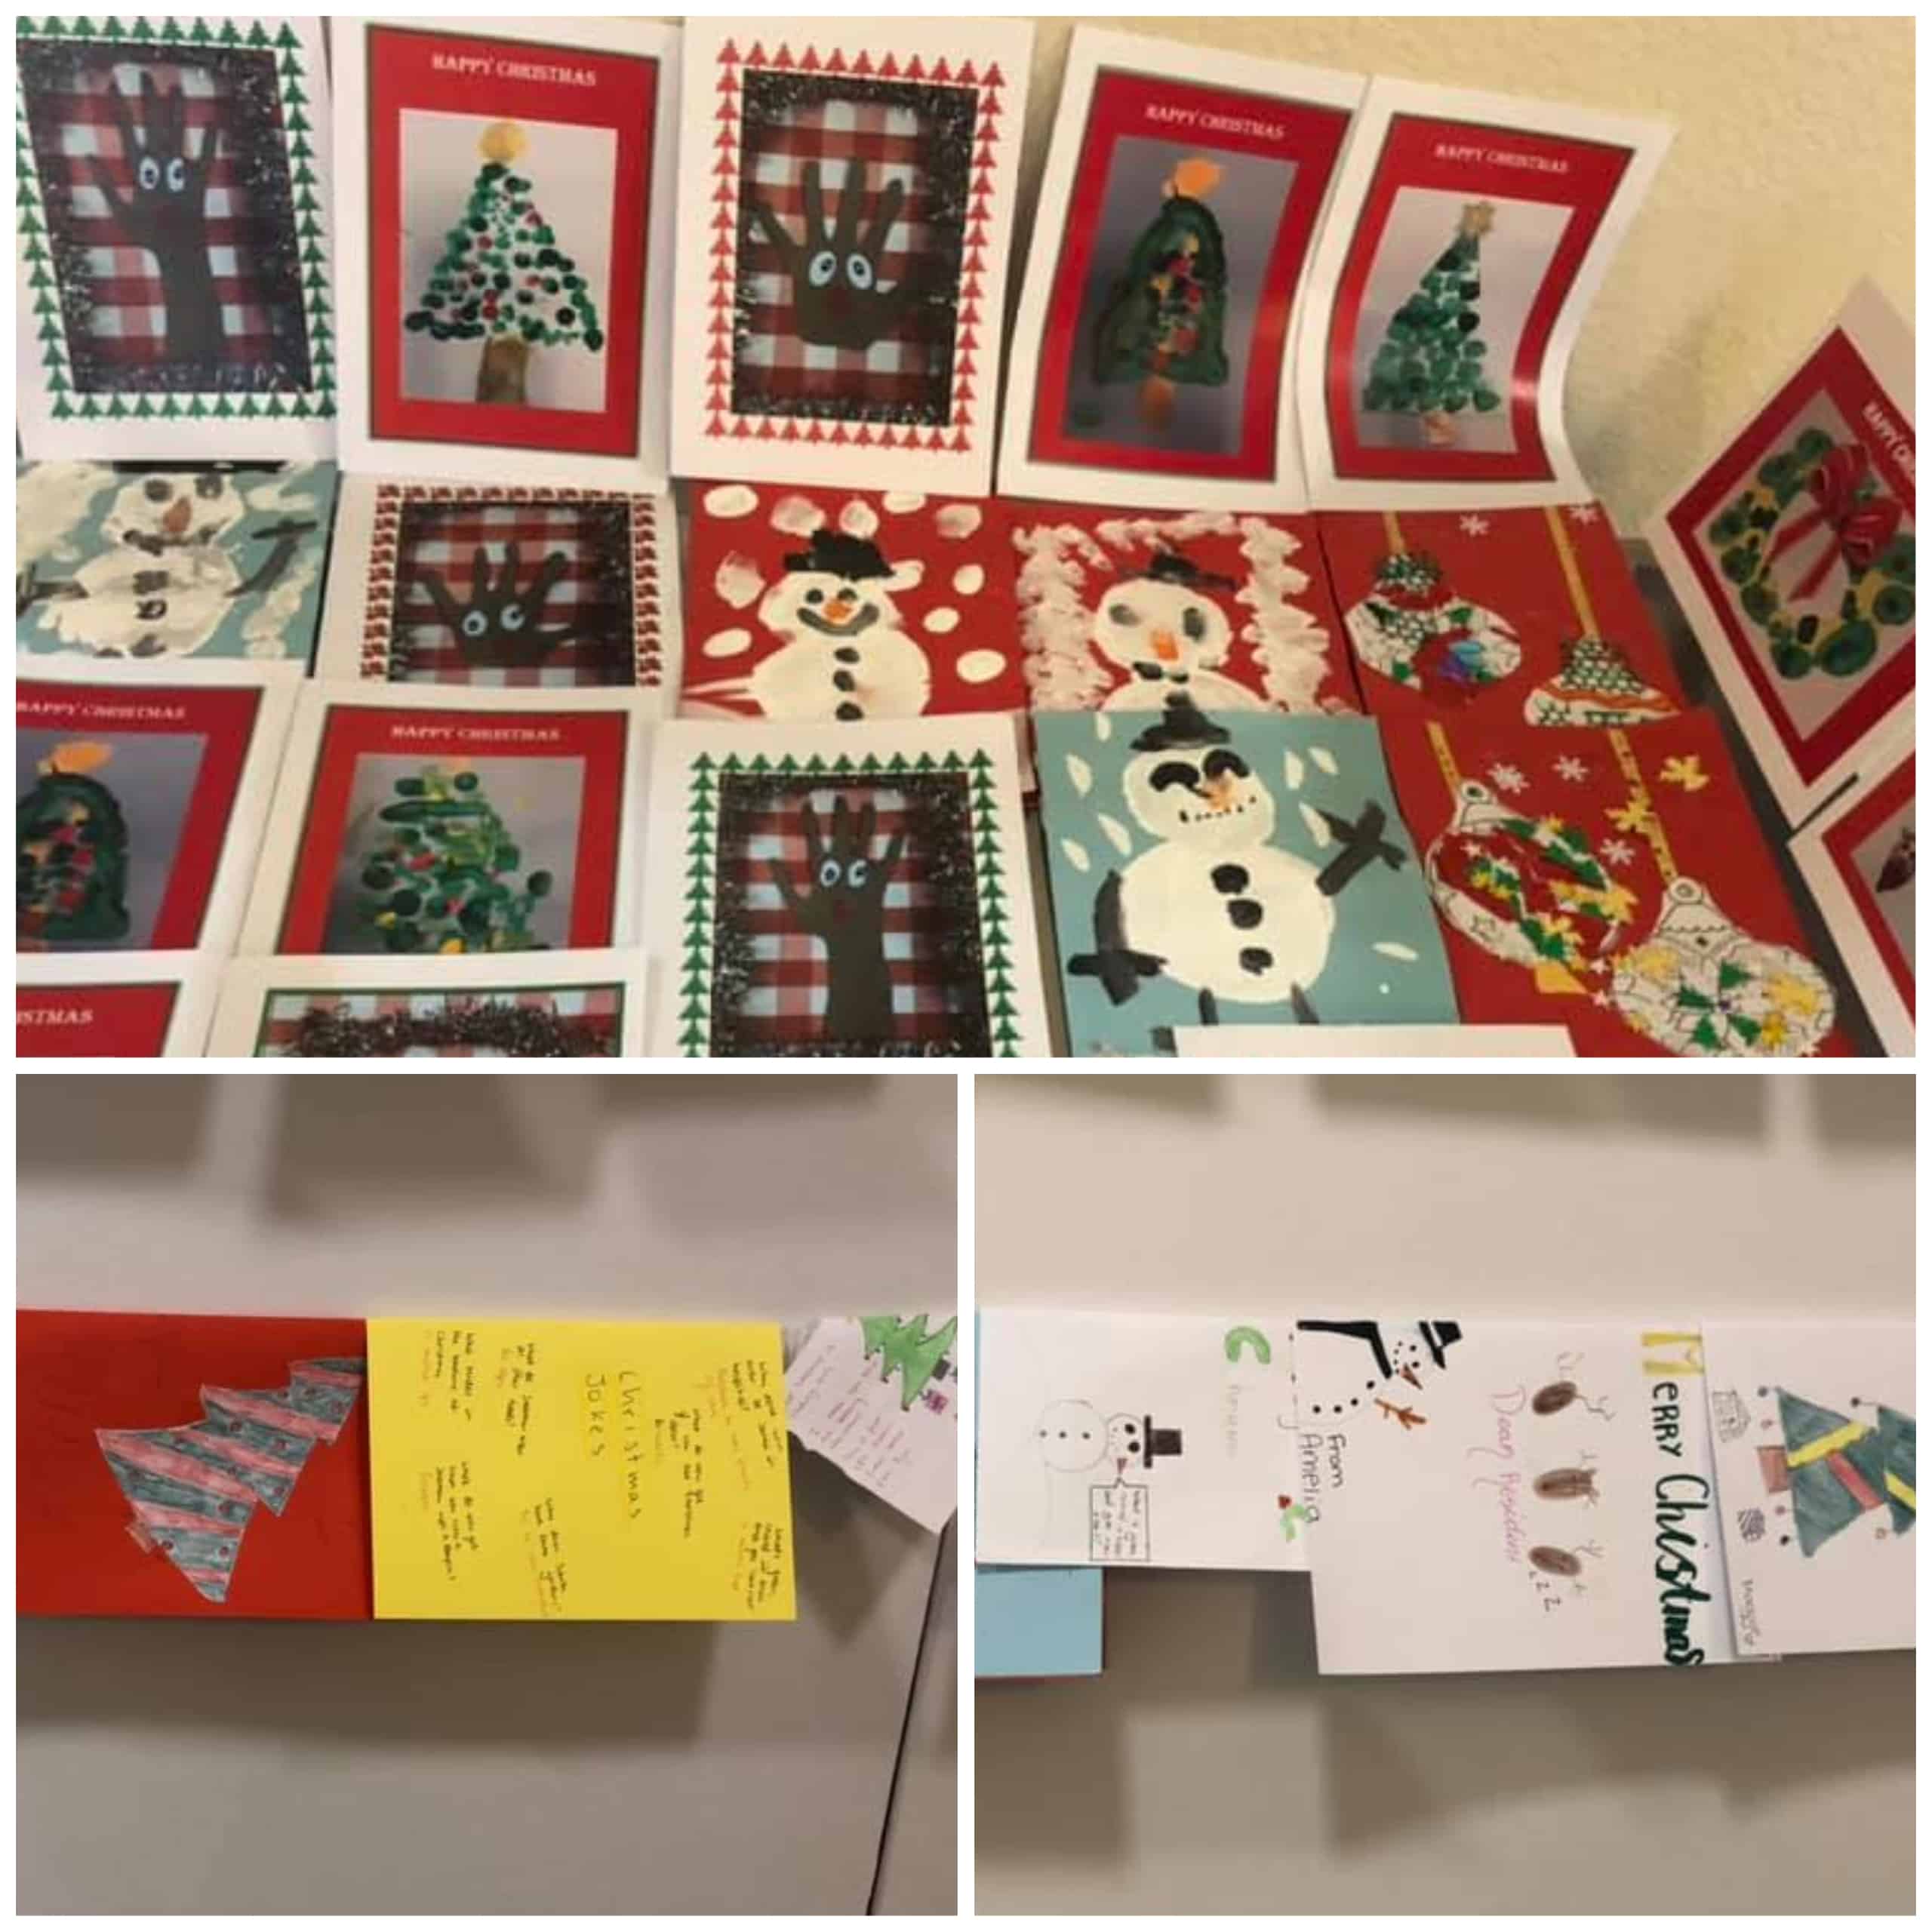 A selection of the hand decorated Christmas cards sent to Westerham Place Care Home residents by local school children.